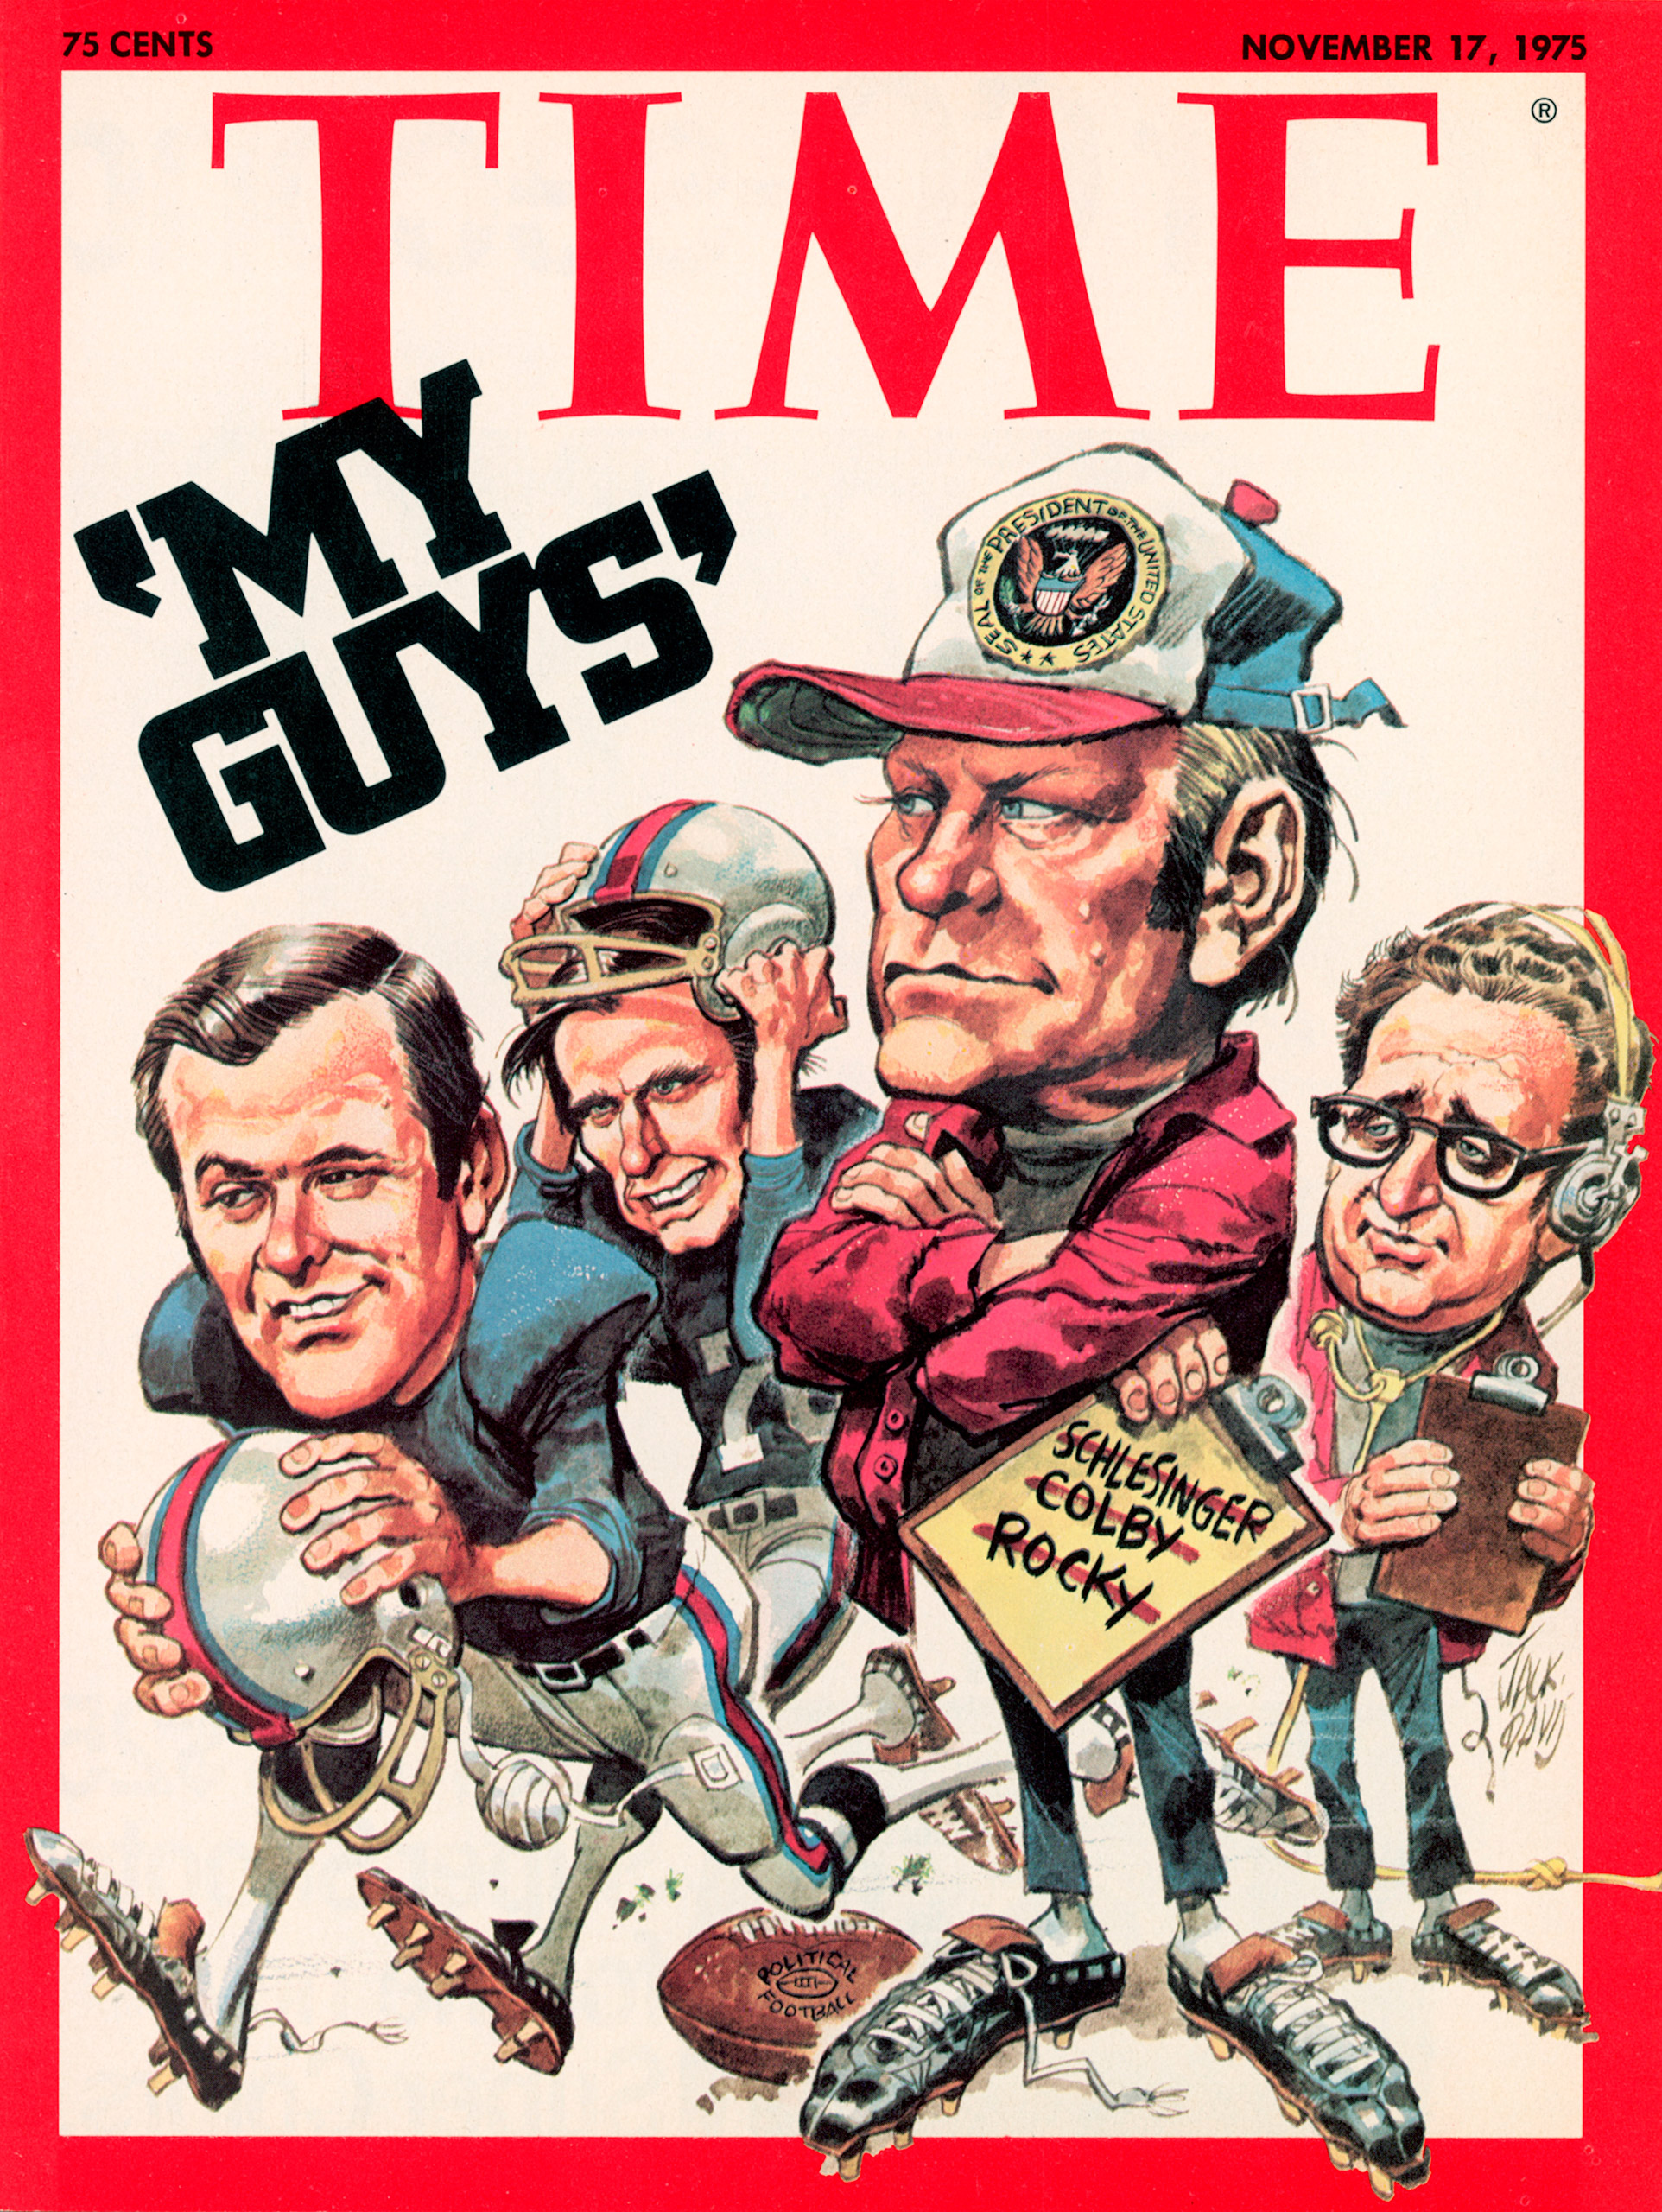 George H.W. Bush, pictured as part of Gerald Ford's team, on the Nov. 17, 1975, cover of TIME